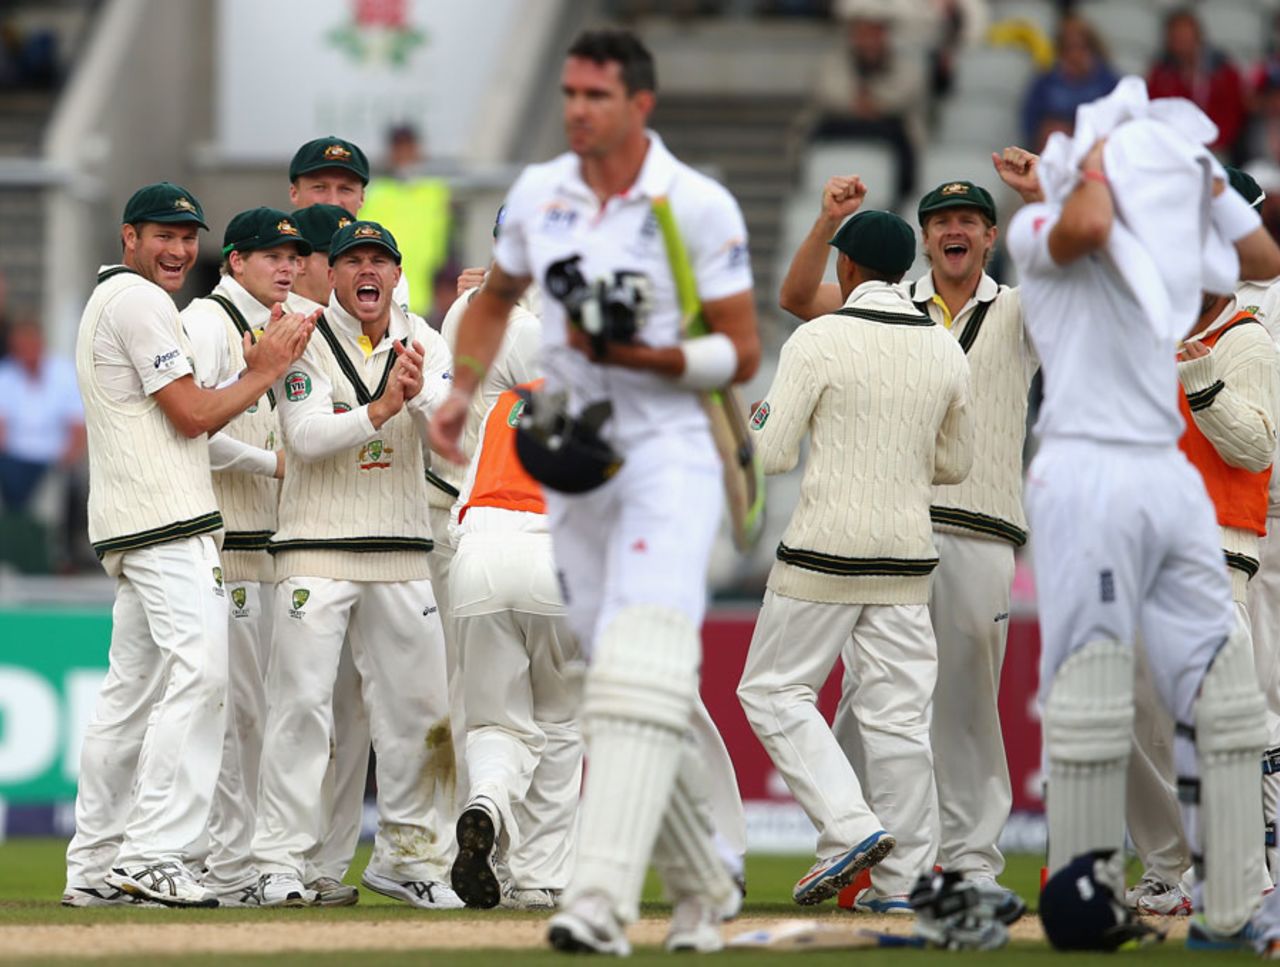 The Australian players are elated with the dismissal of Kevin Pietersen, England v Australia, 3rd Investec Test, Old Trafford, 5th day, August 5, 2013